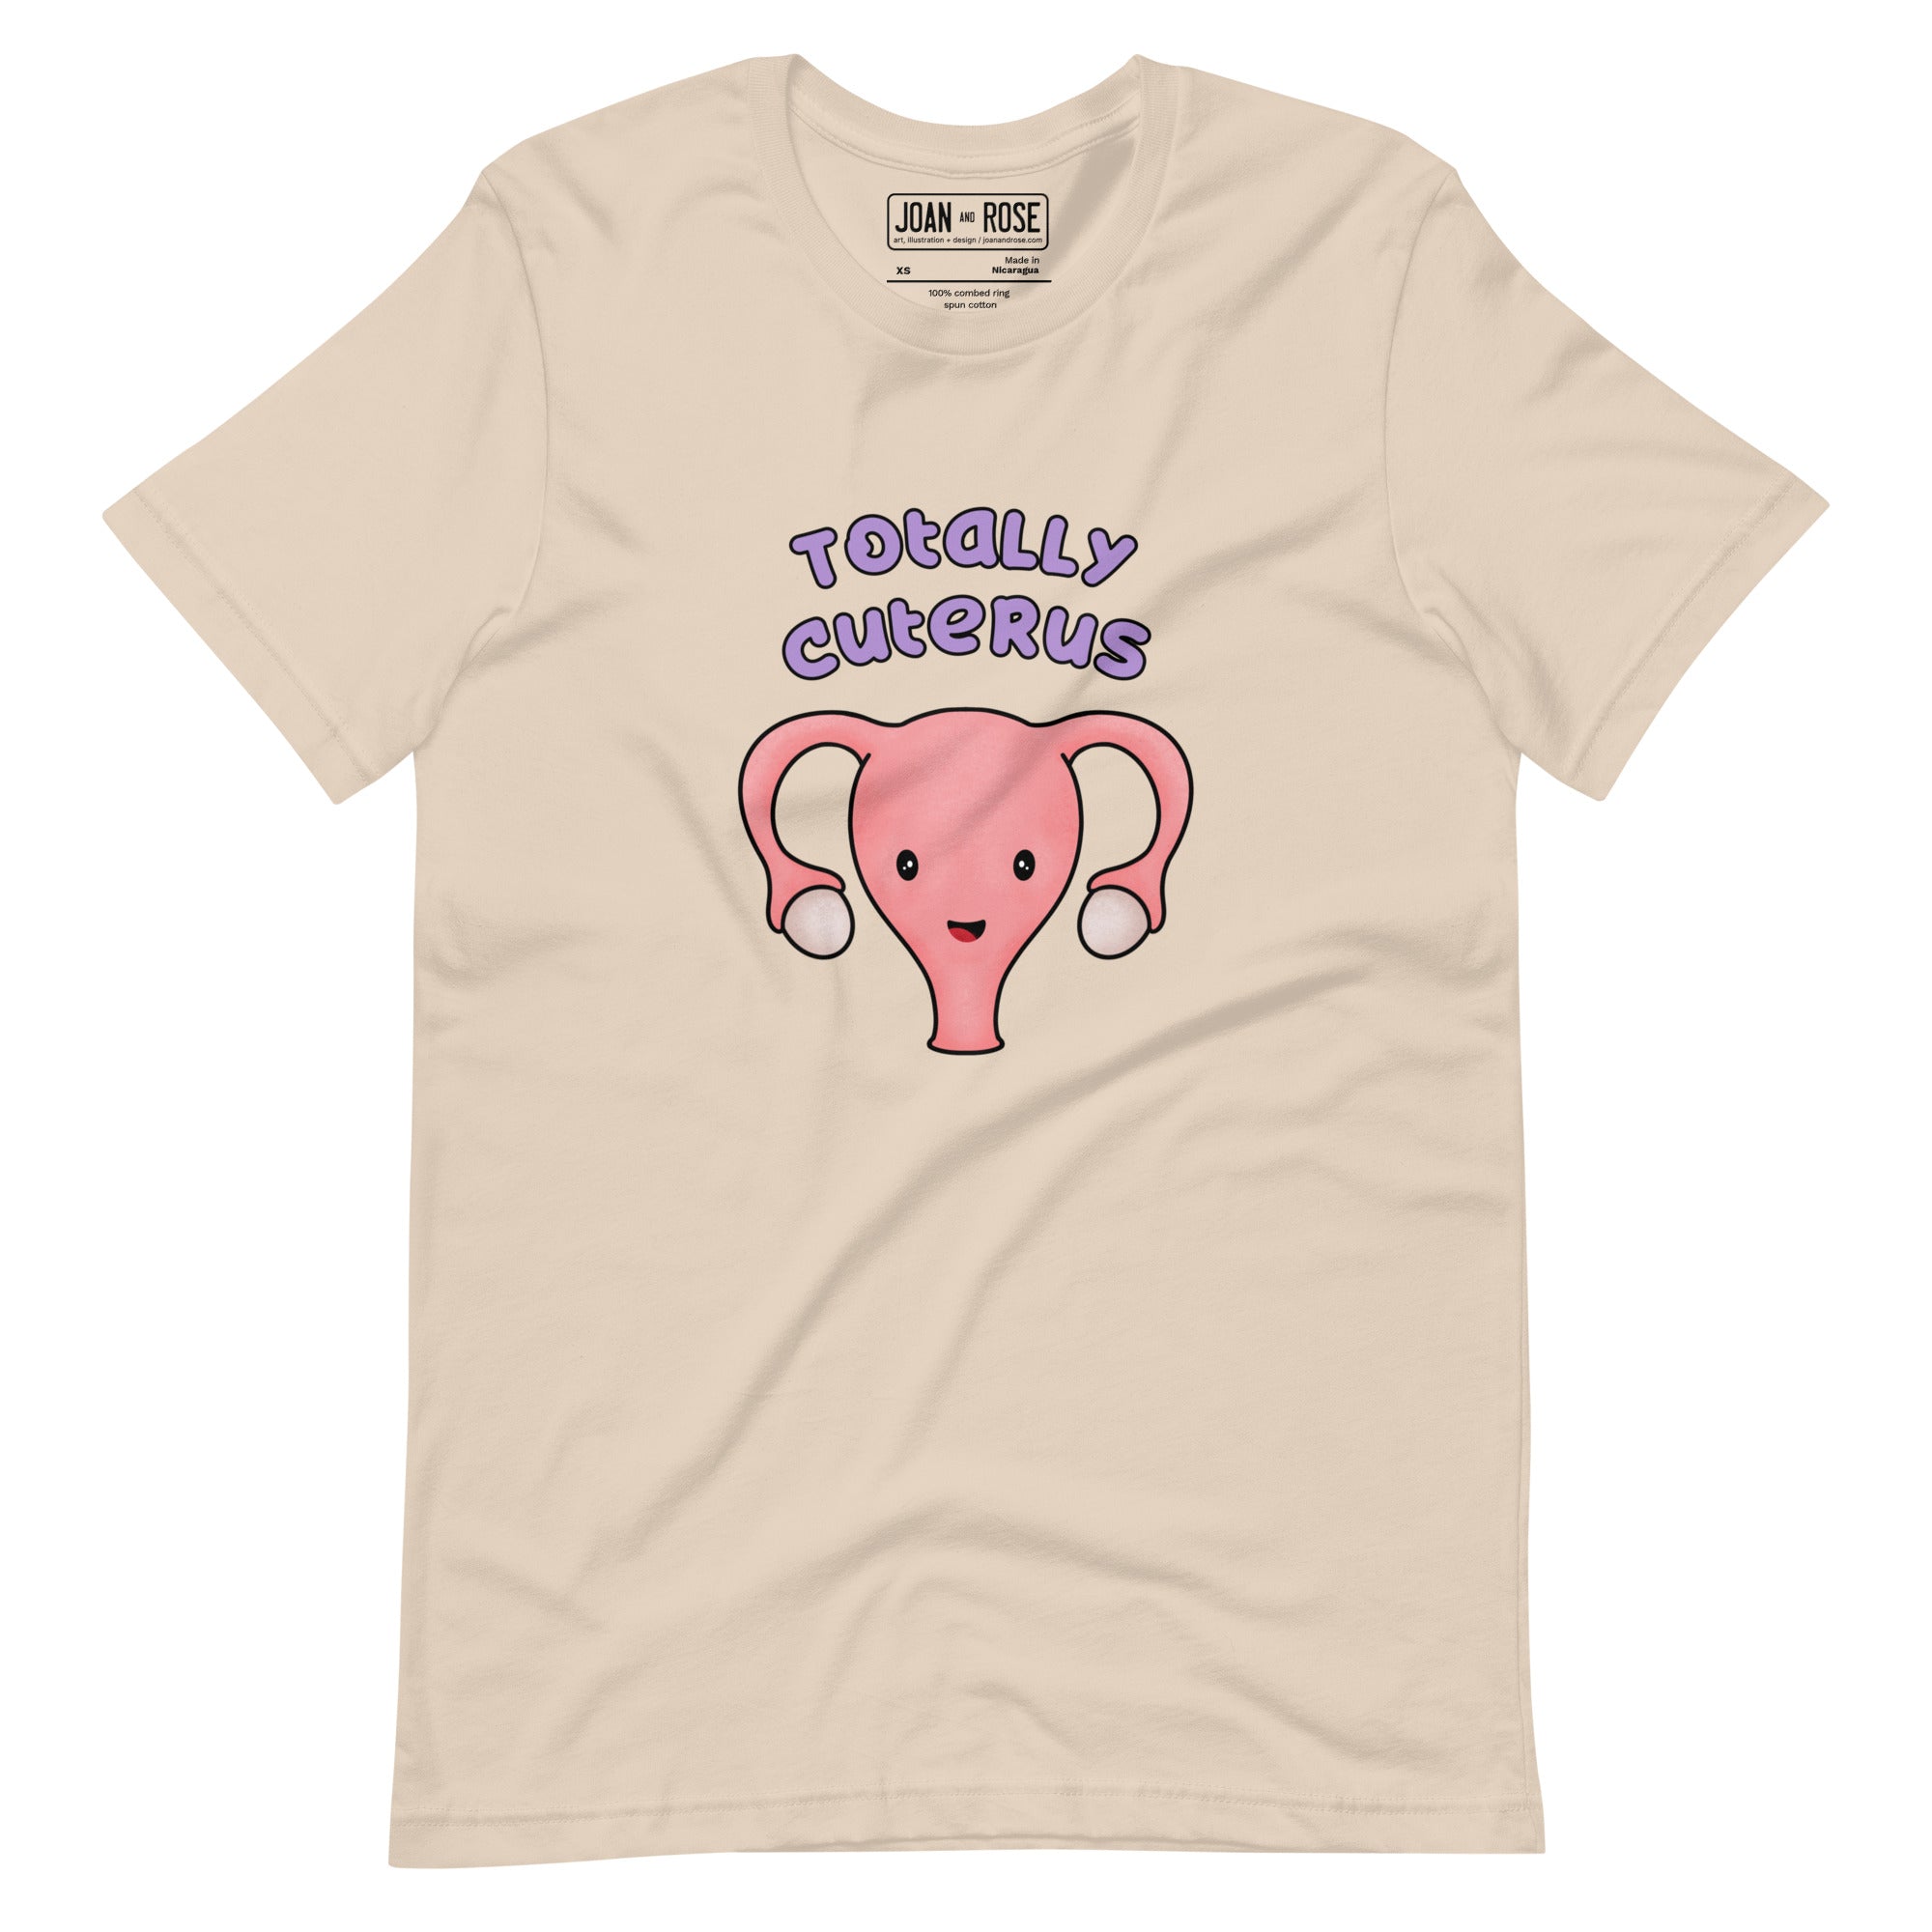 Cream coloured  t-shirt with an illustration of a cute uterus character smiling with the text in purple 'Totally Cuterus'